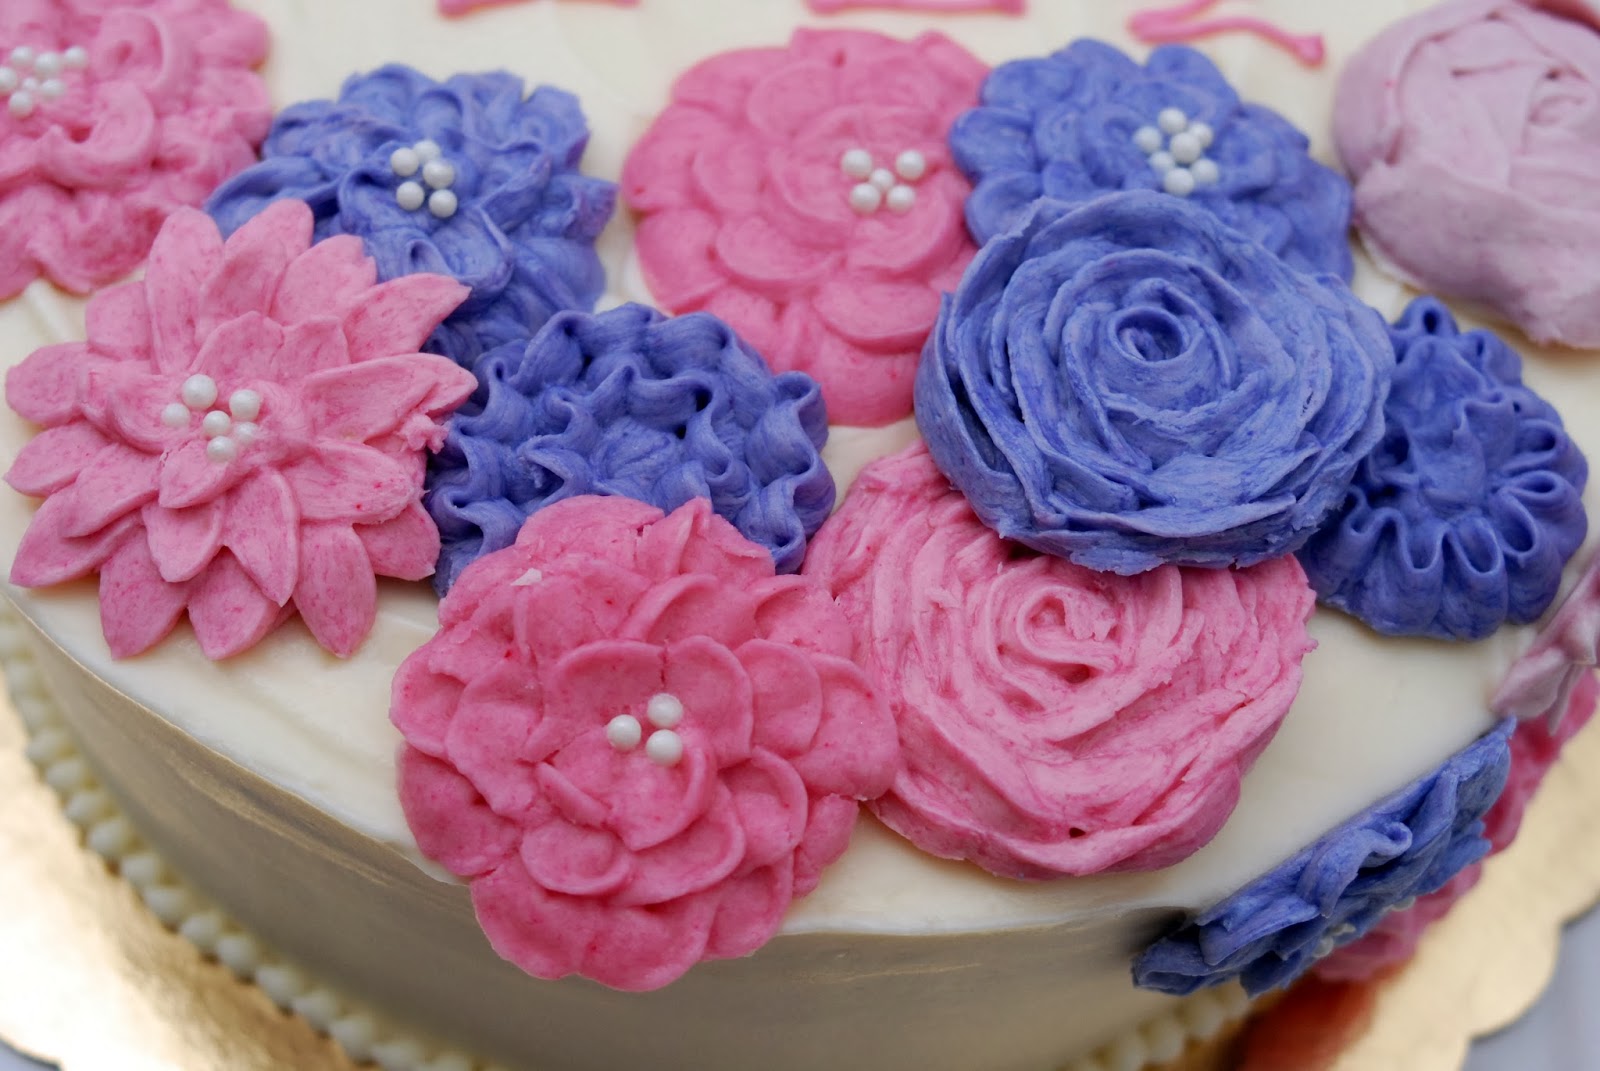 how so i to flowers icing  flowers and out the buttercream buttercream  make try  to roses decided purple